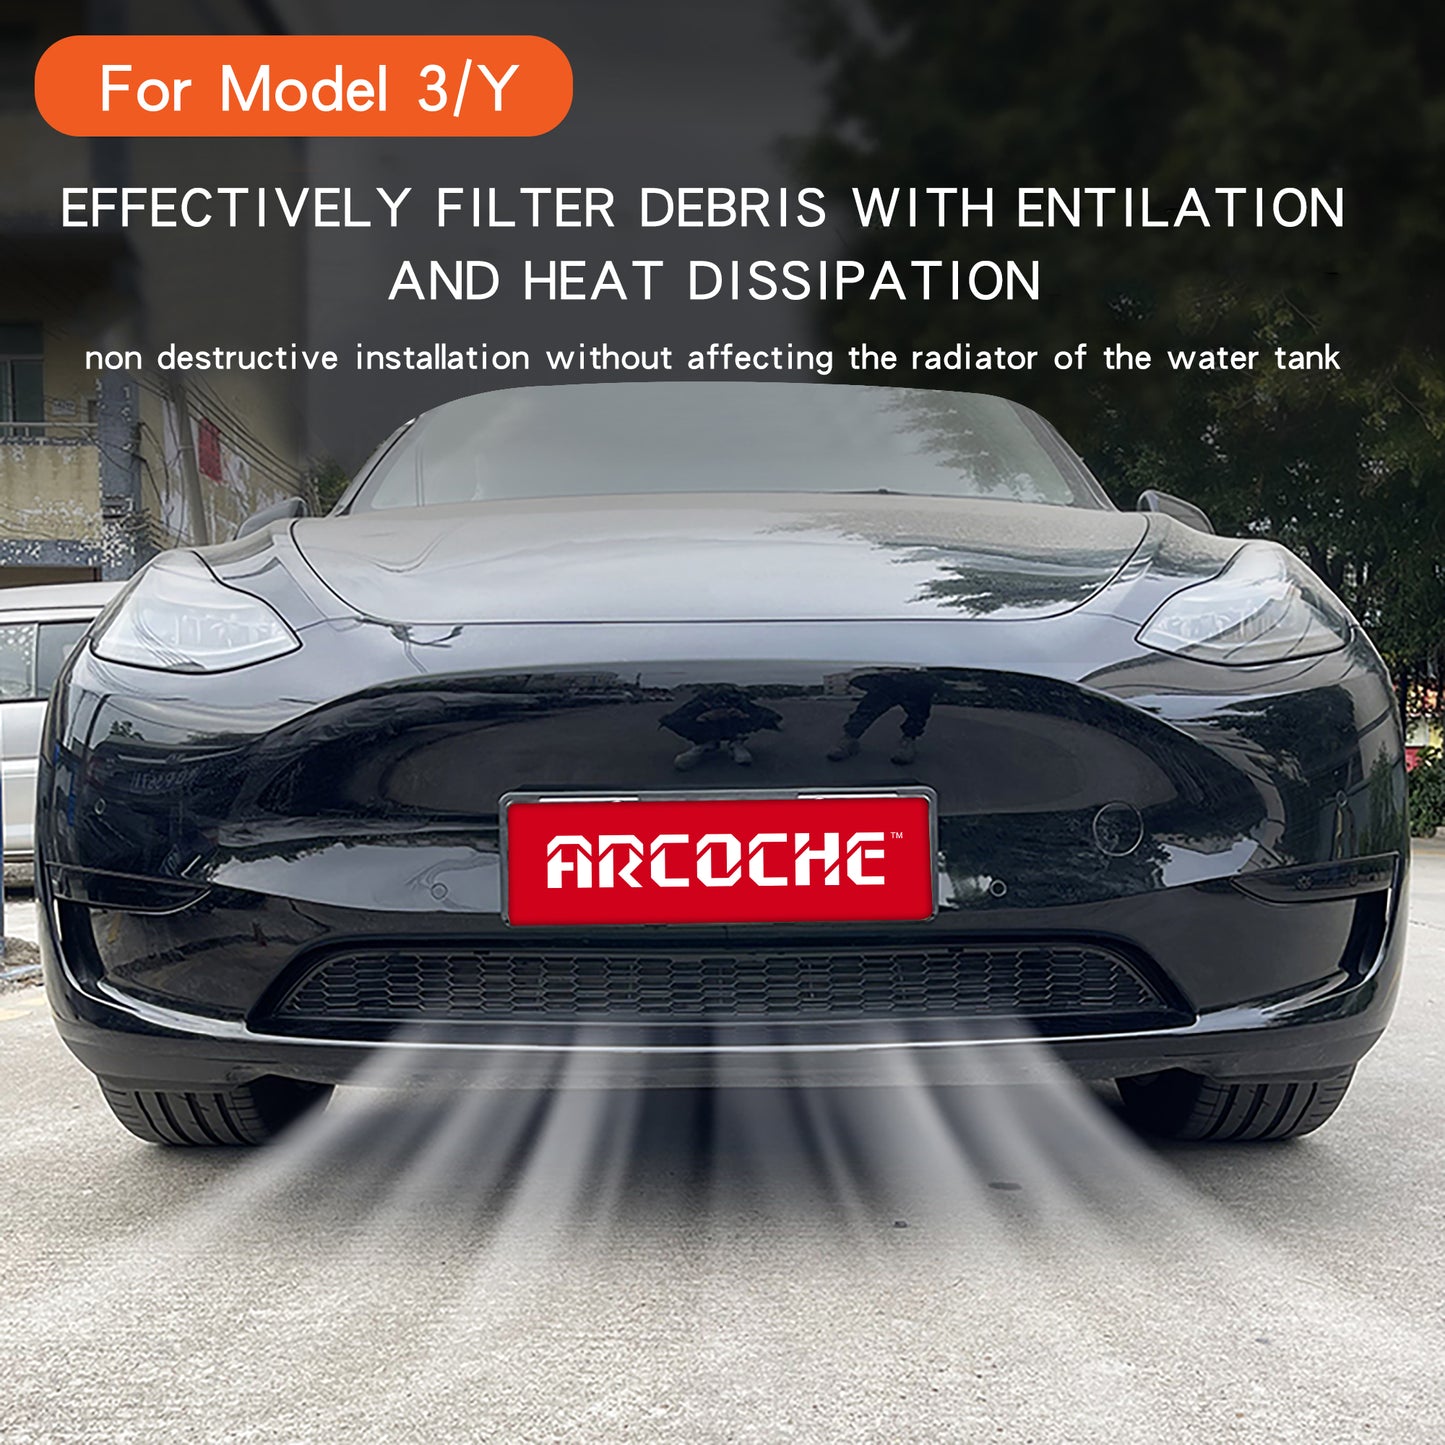 tesla model 3 Y anti insect net leaves rocks front grill mesh lower bumper car 2022 2023 2021 2020 2019 2018 s3xy arcoche accessories accessory aftermarket price Vehicles standard long range performance sr+ electric car rwd ev interior exterior diy decoration price elon musk must have black white red blue